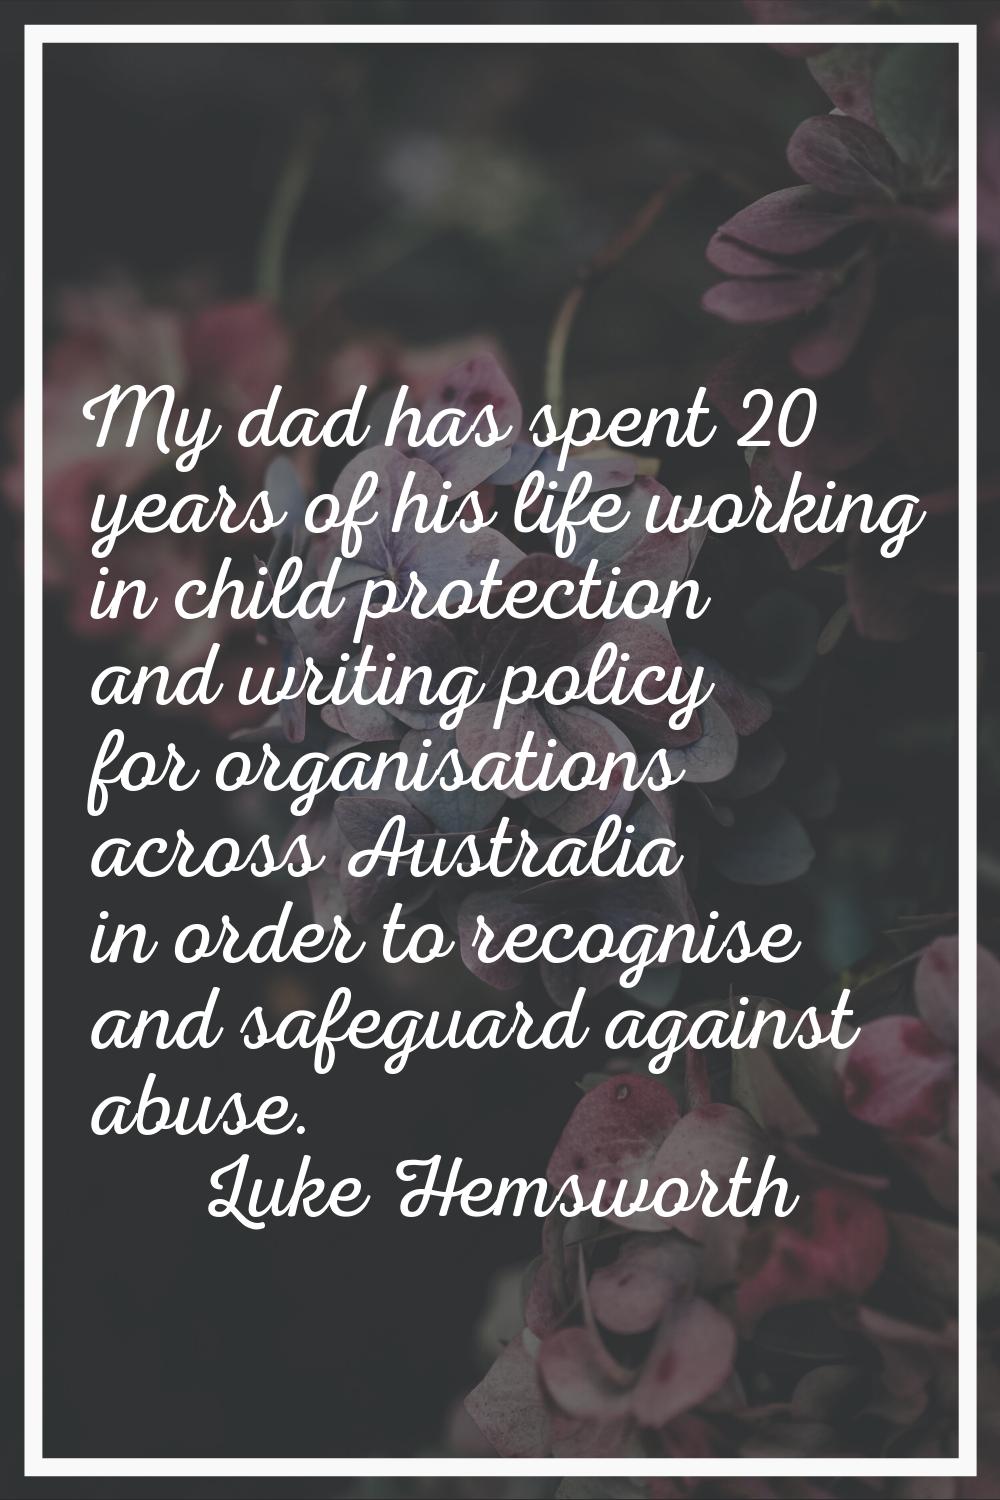 My dad has spent 20 years of his life working in child protection and writing policy for organisati